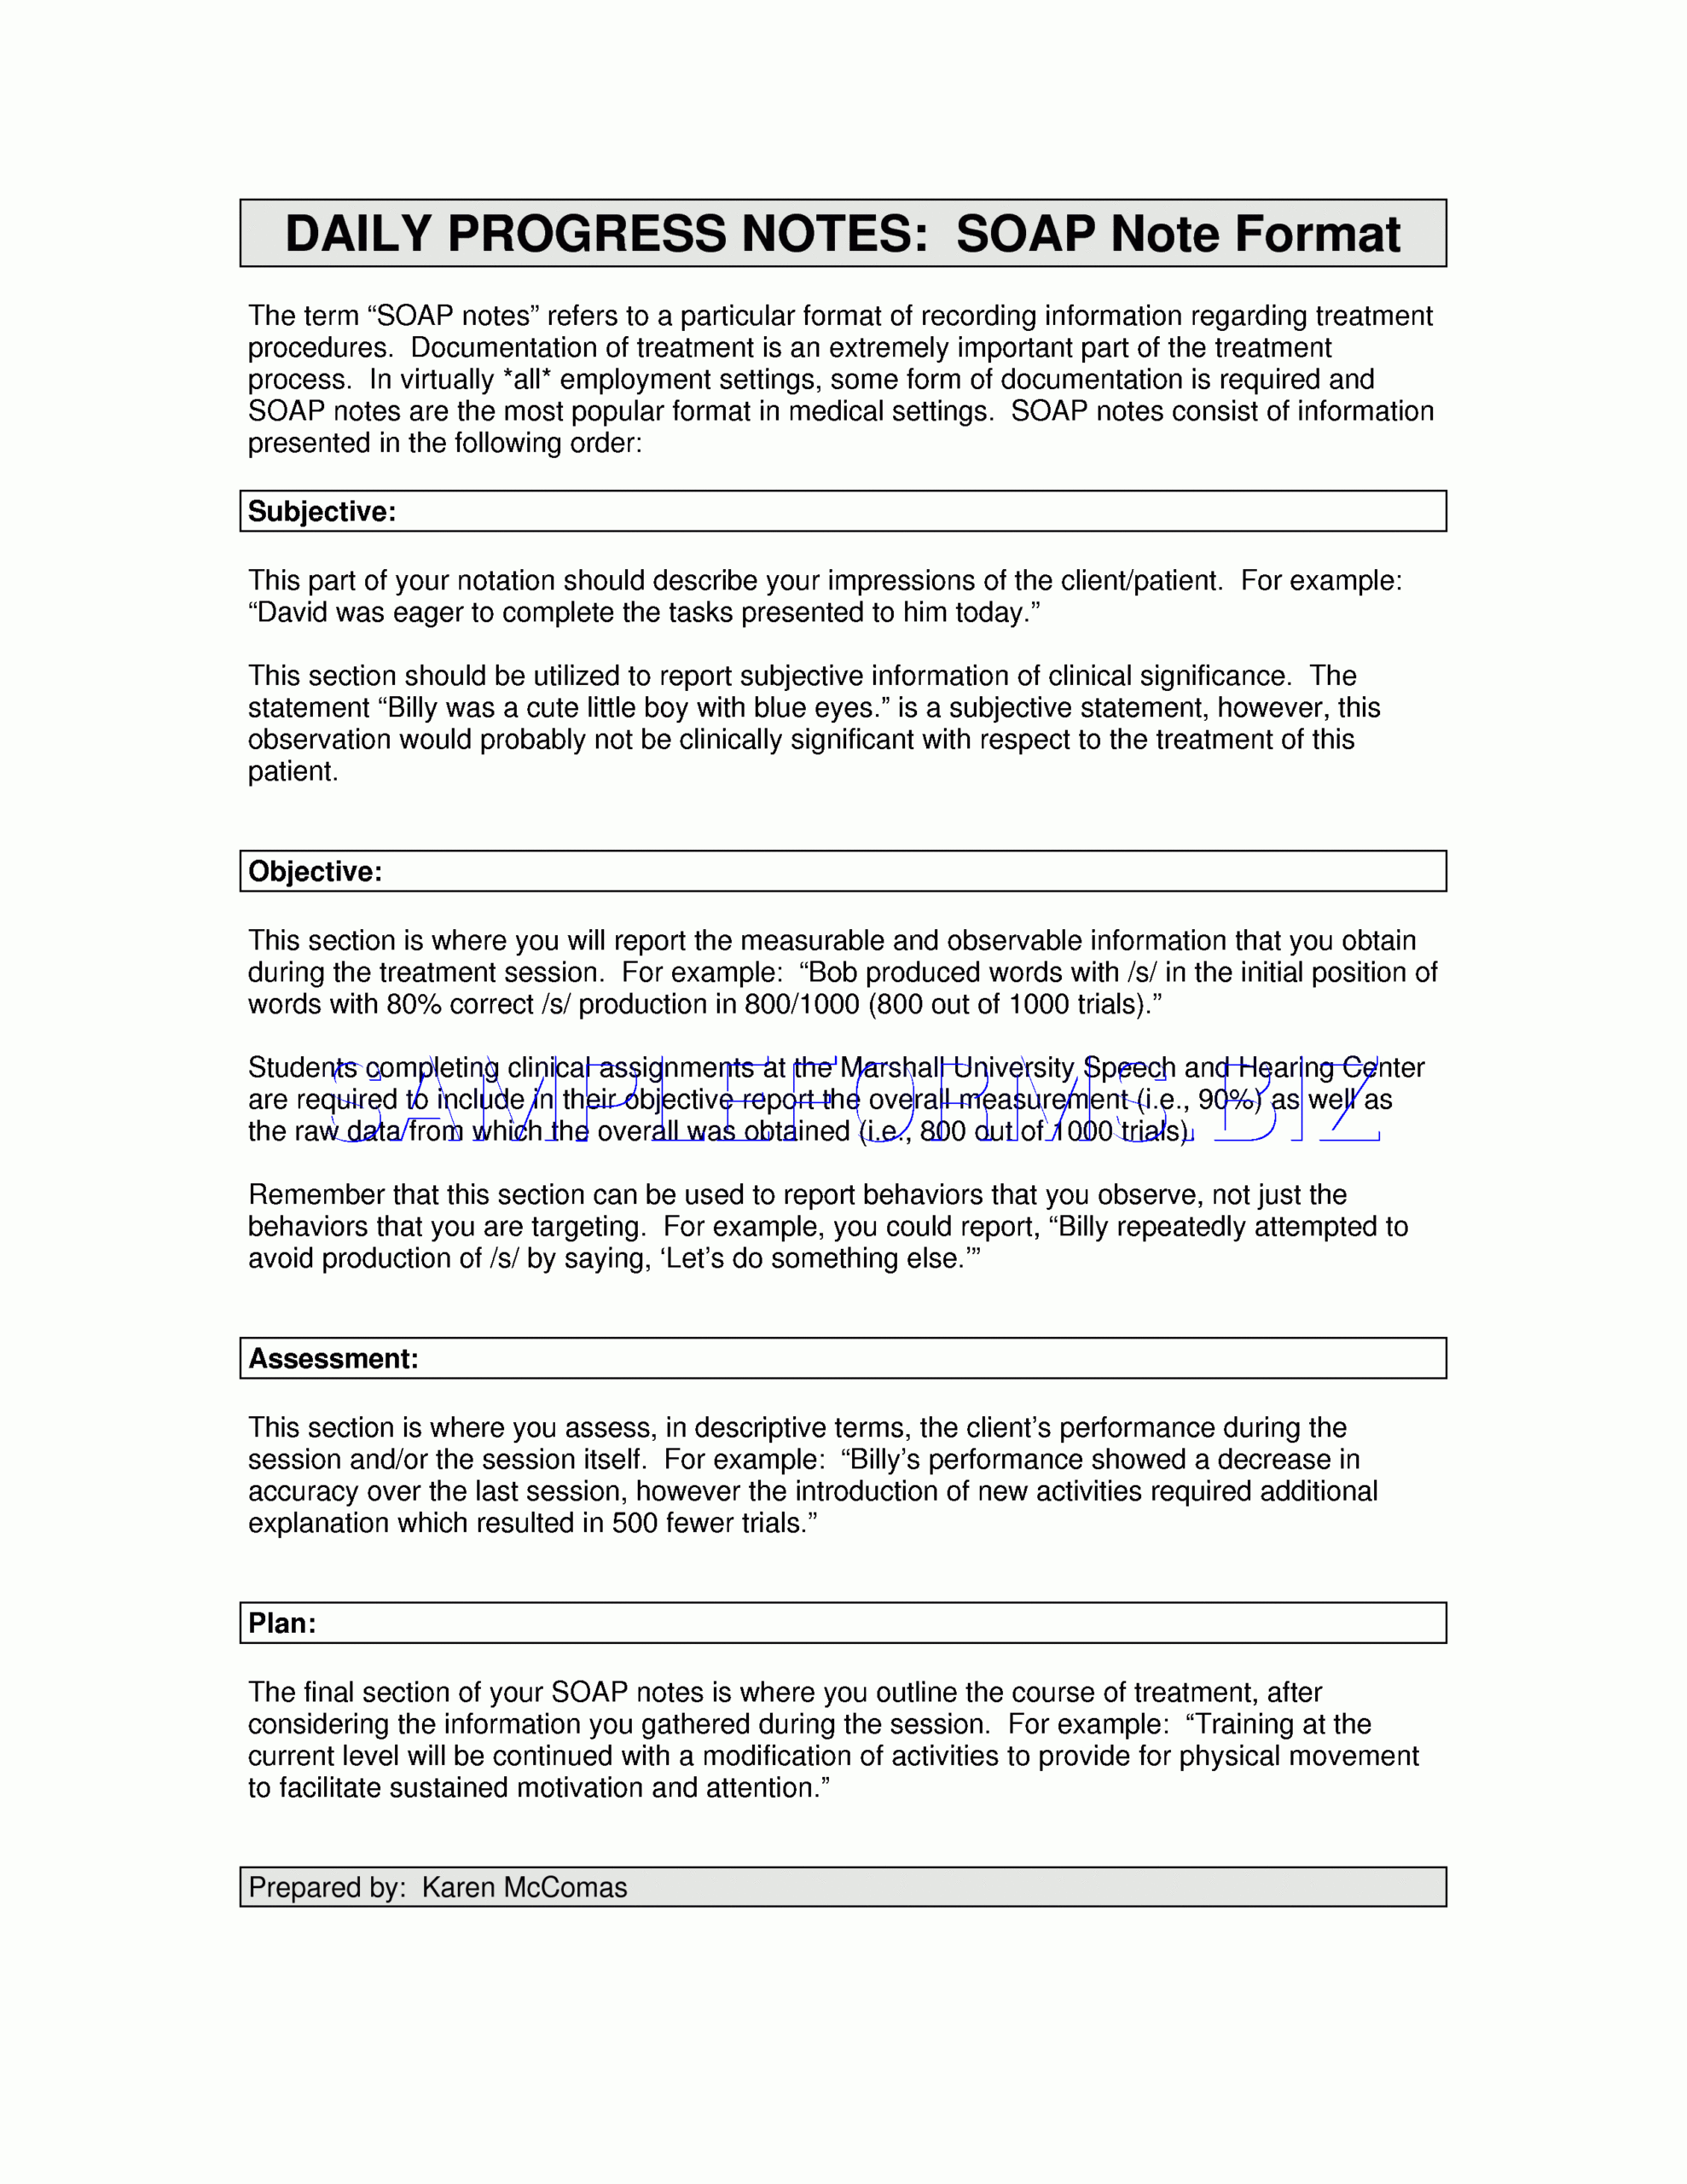 Preview Pdf Soap Note Format Template, 2 Intended For Soap Report Template